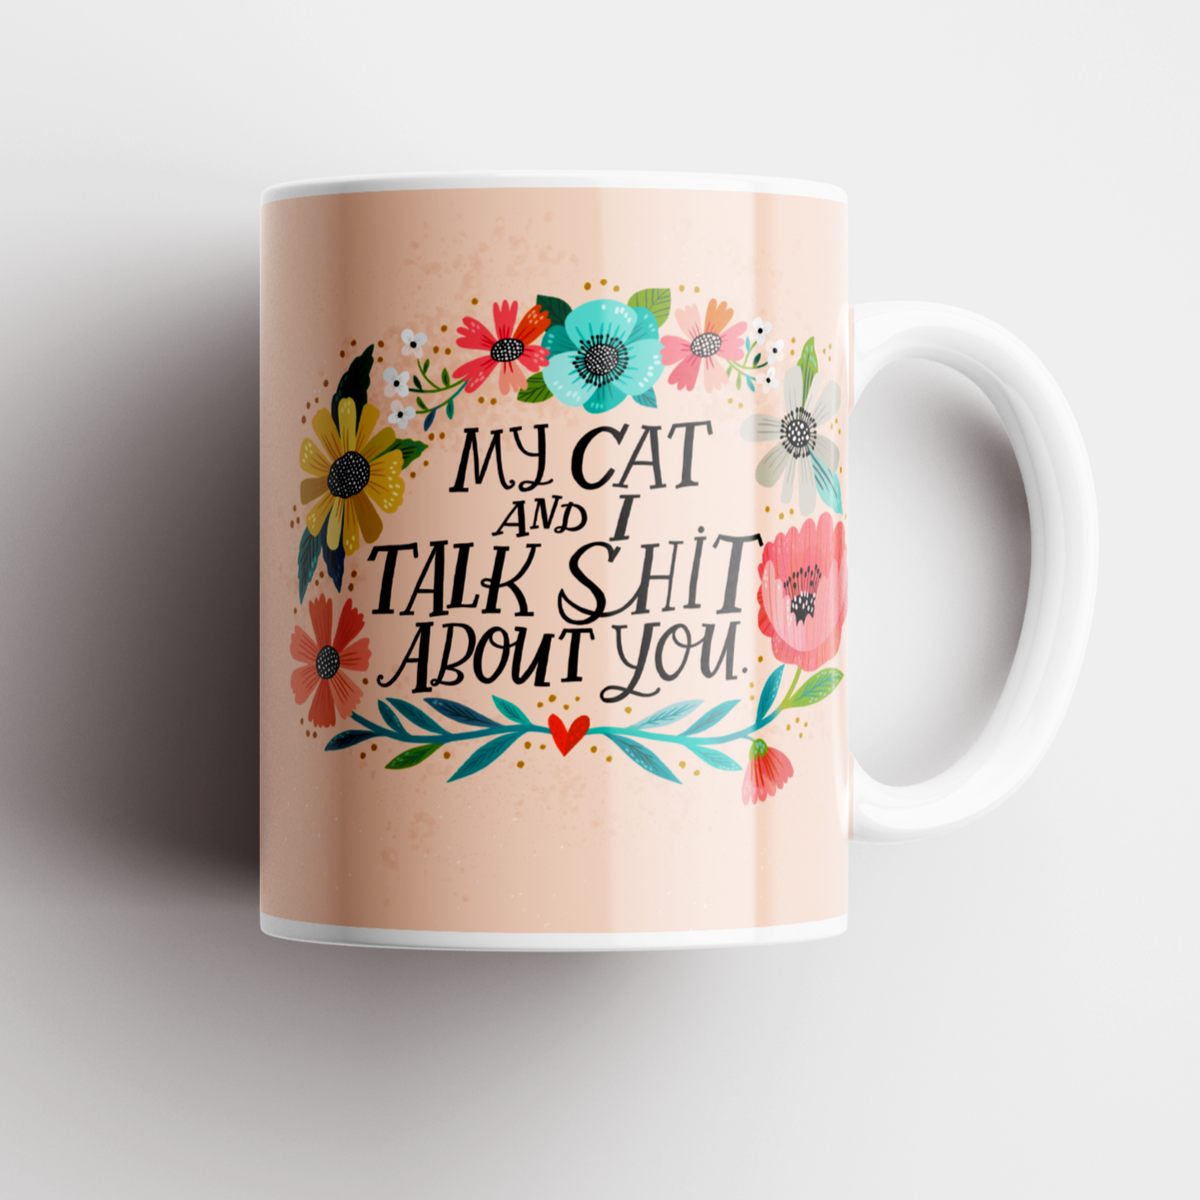 My Cat and I Talk Shit About You Mug